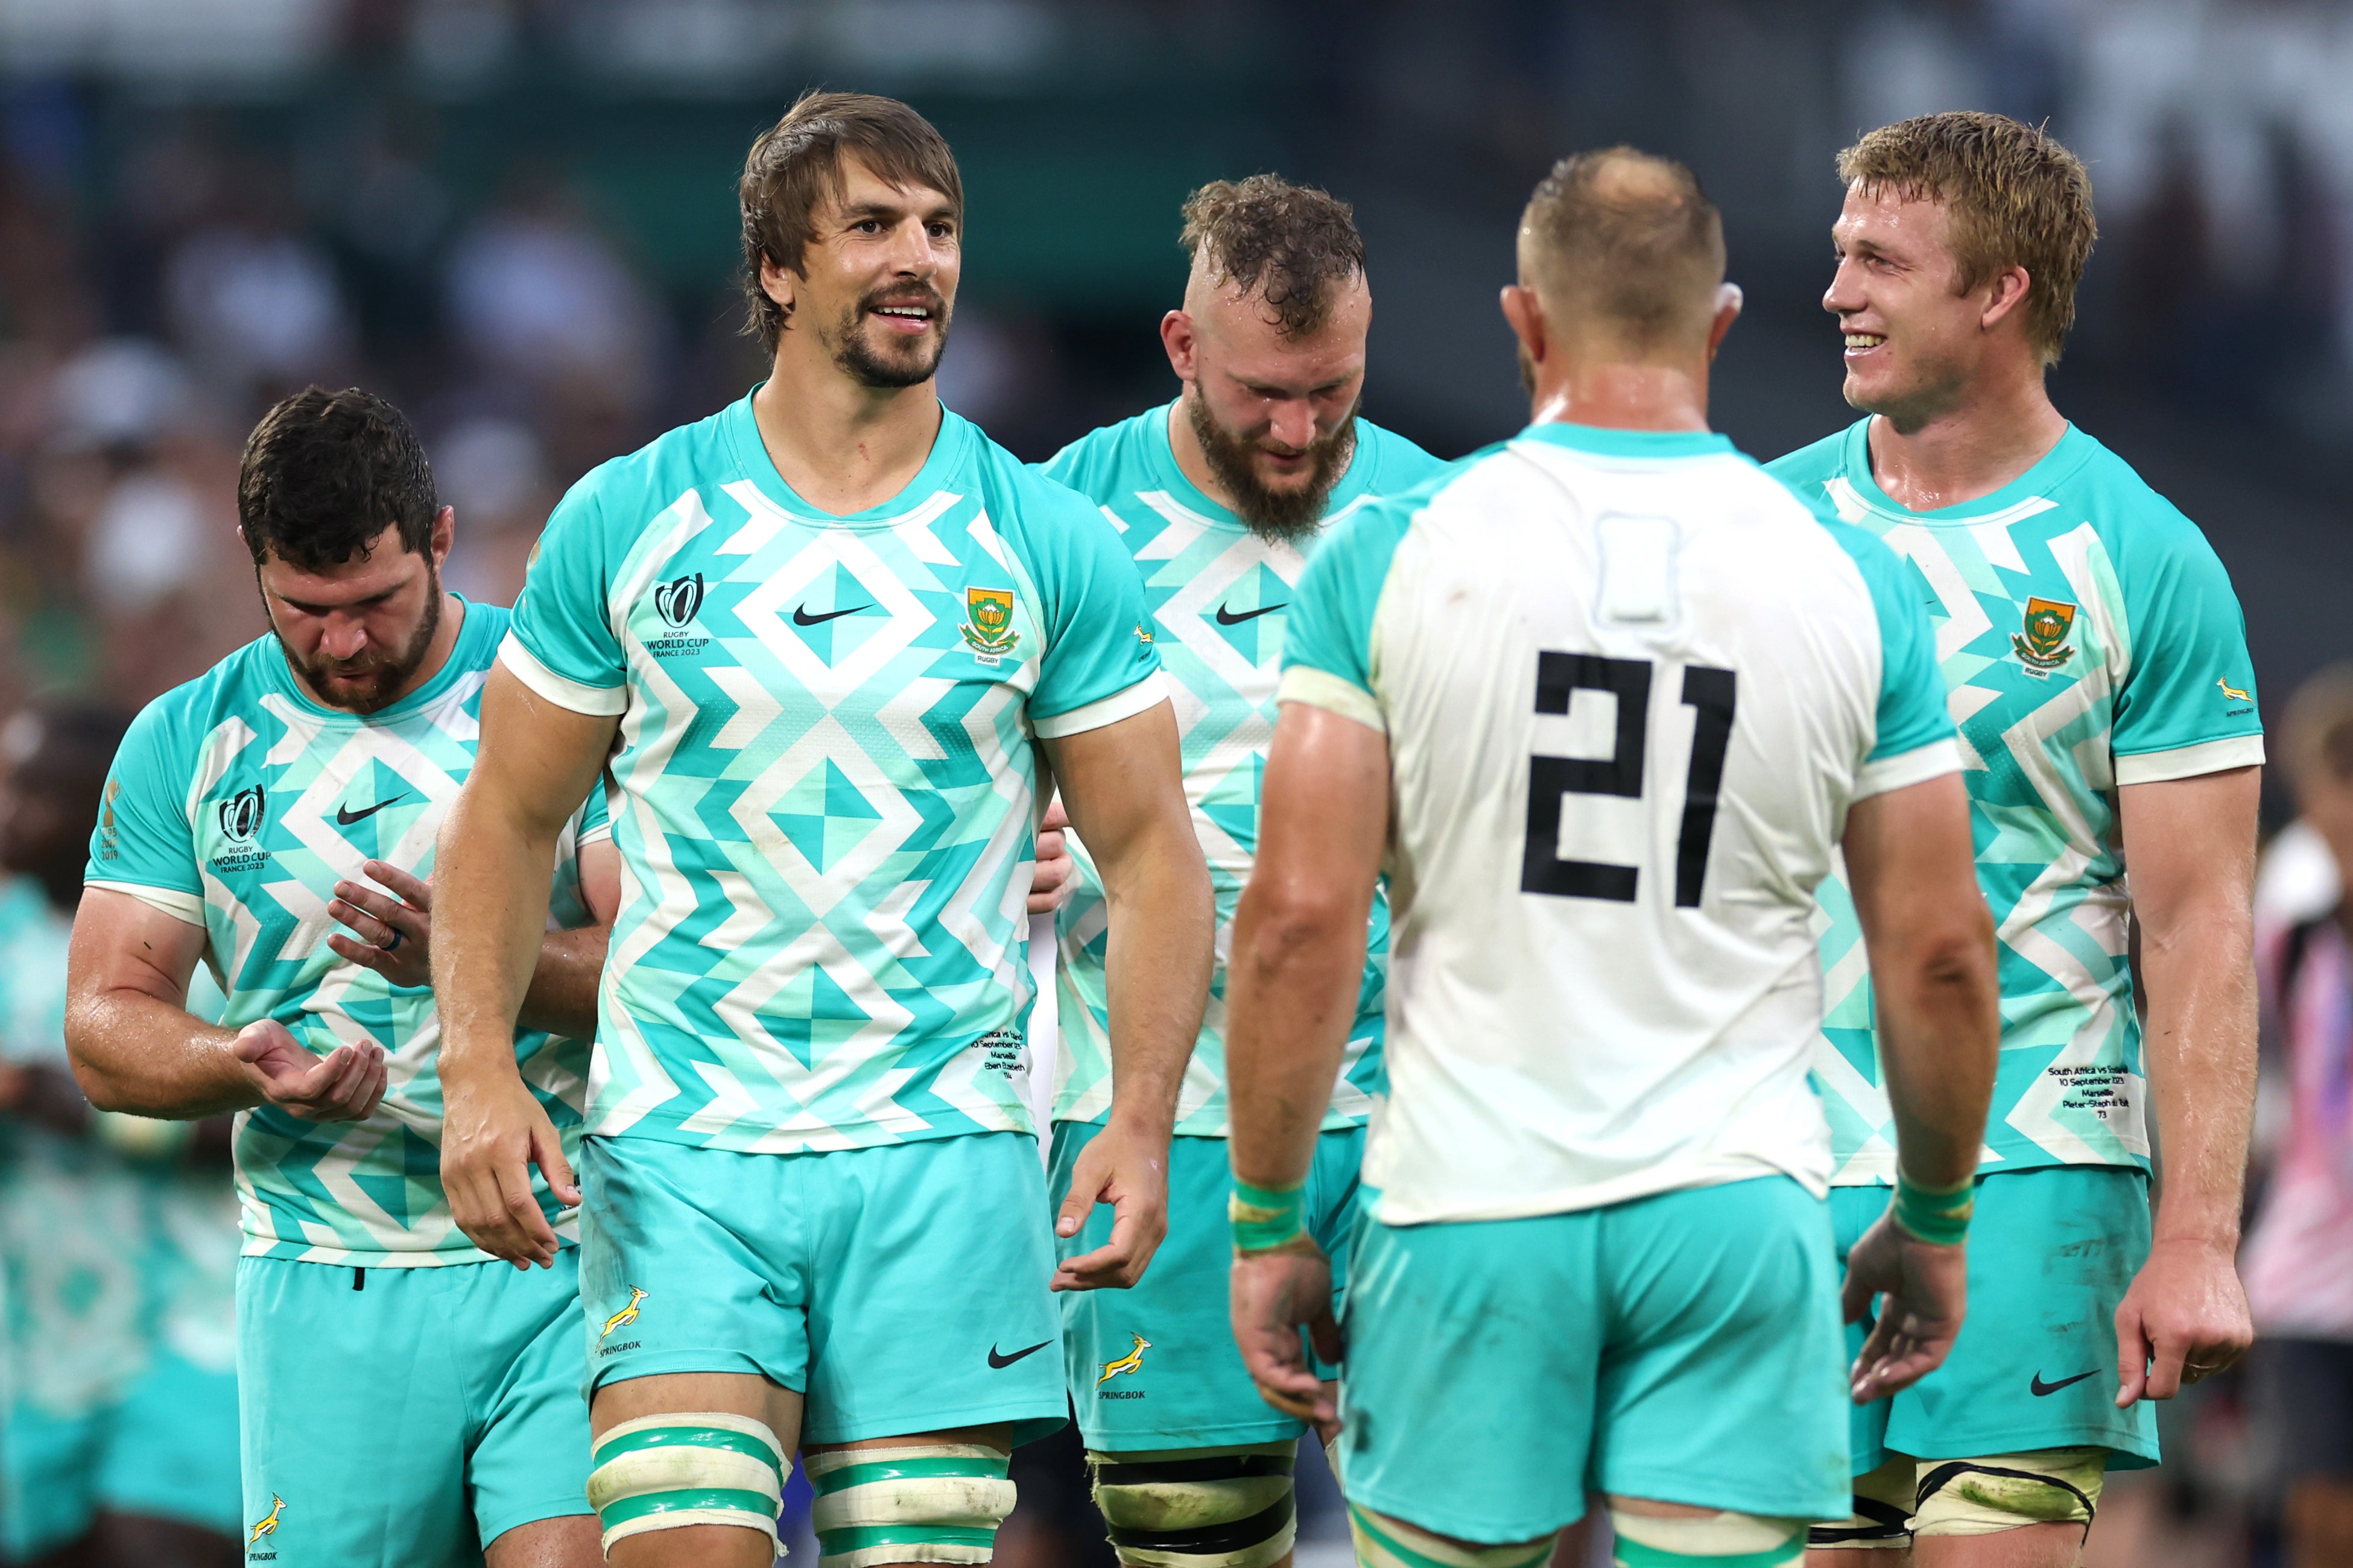 Etzebeth won’t be fit to face Romania in the next group game